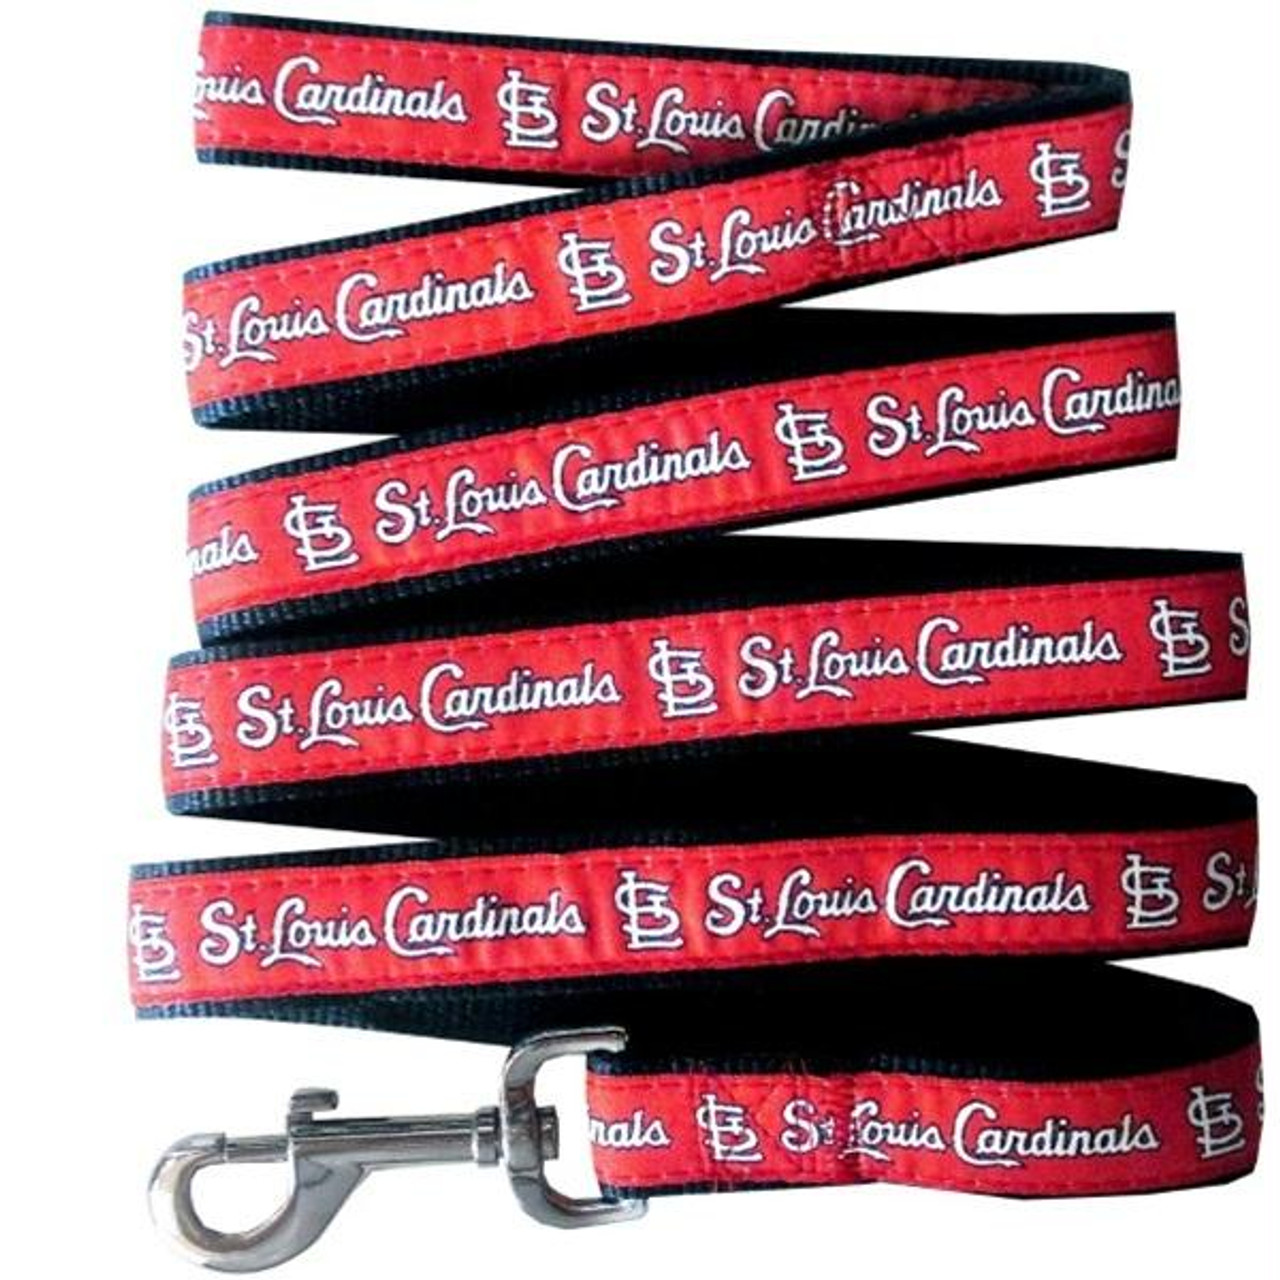 Pets First Saint Louis Cardinals Pet Leash, Small, Red